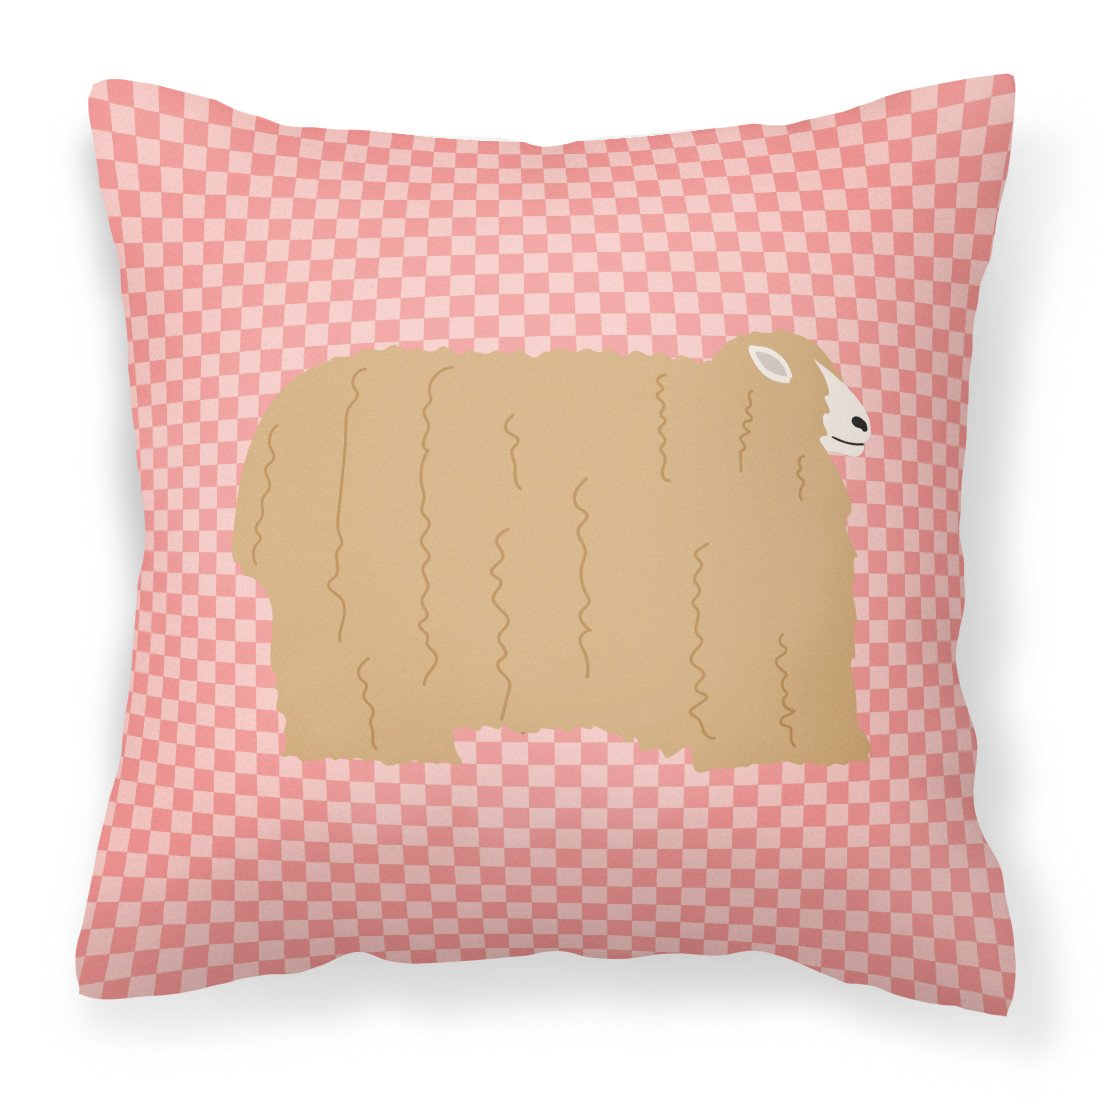 Lincoln Longwool Sheep Pink Check Fabric Decorative Pillow BB7971PW1818 by Caroline's Treasures